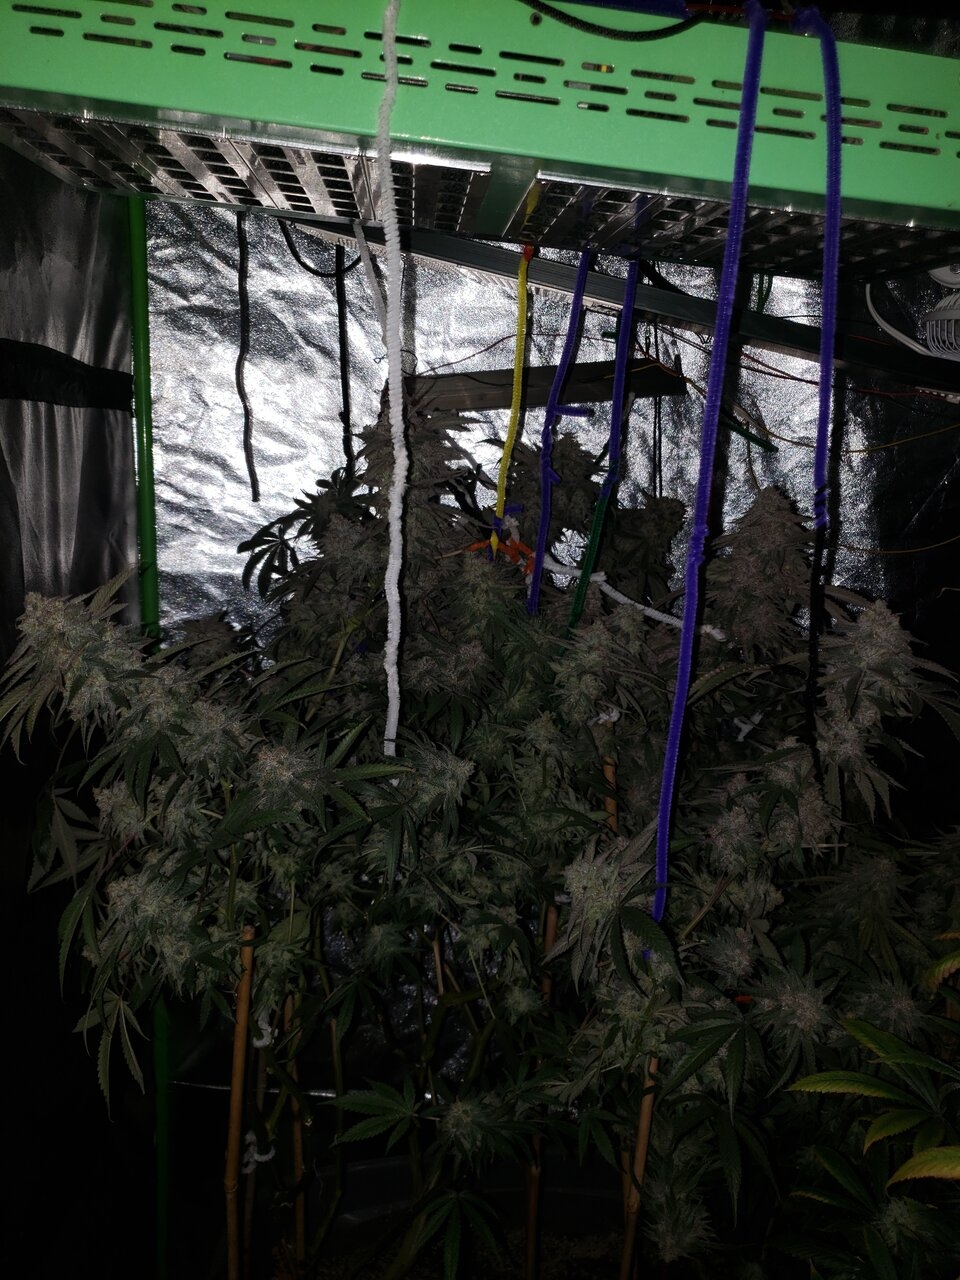 HB Sweet Tooth flower shot tall pheno got her strung up lol